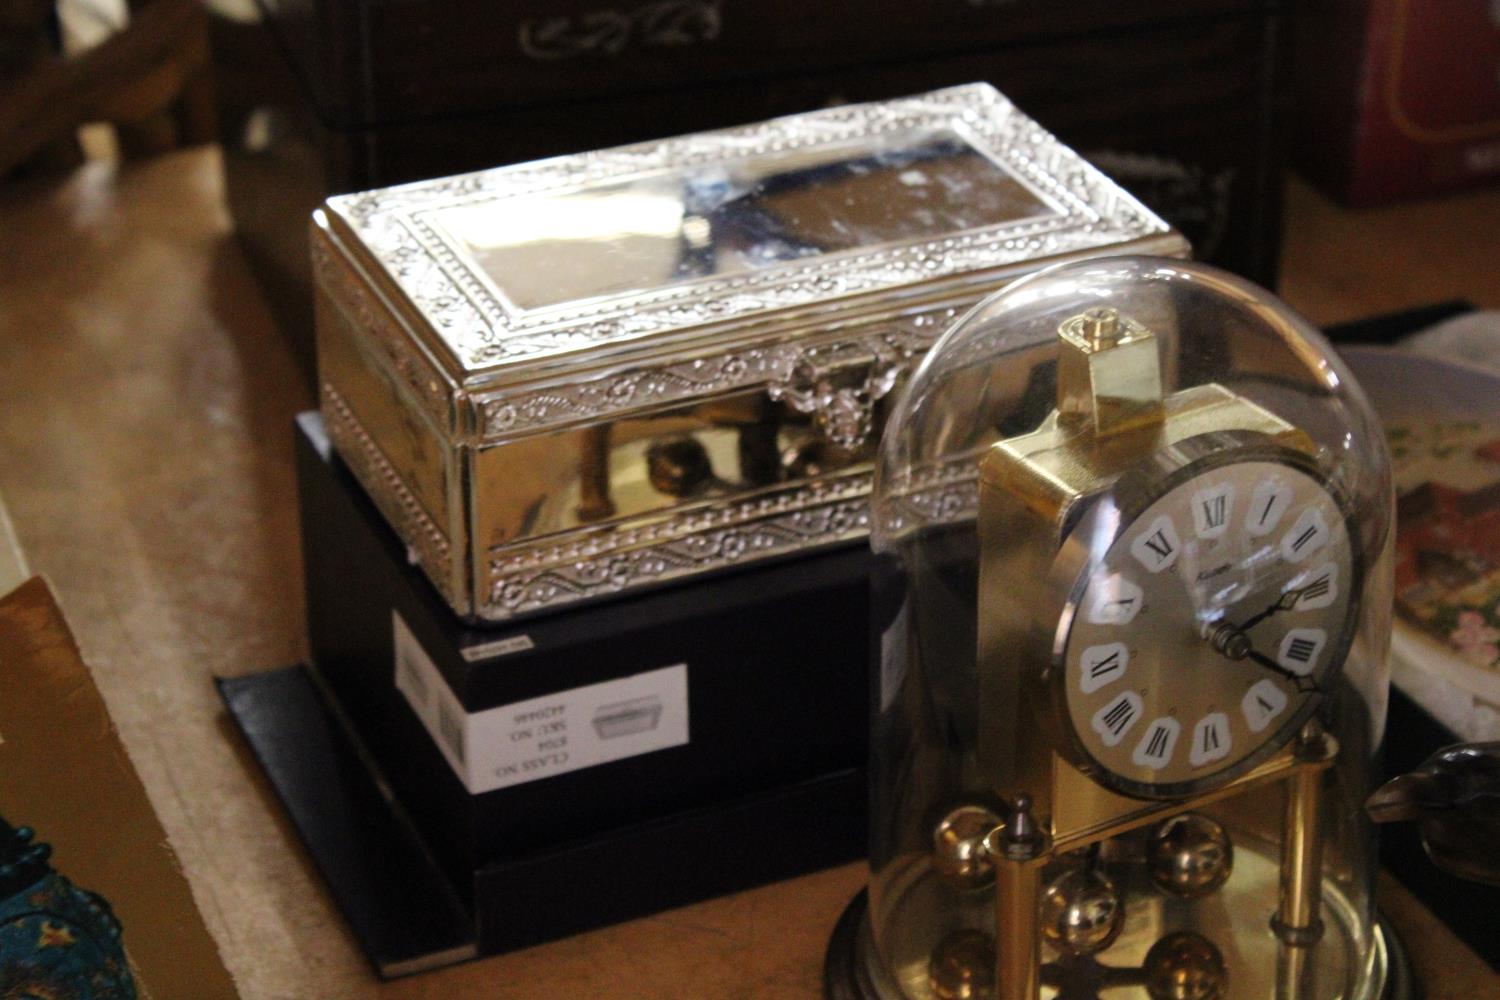 A VINTAGE HALINA 2000 CAMERA, SMALL DOMED ANNIVERSARY CLOCK, MIRRORED BOX, WALL PLAQUE, ETC - Image 5 of 5